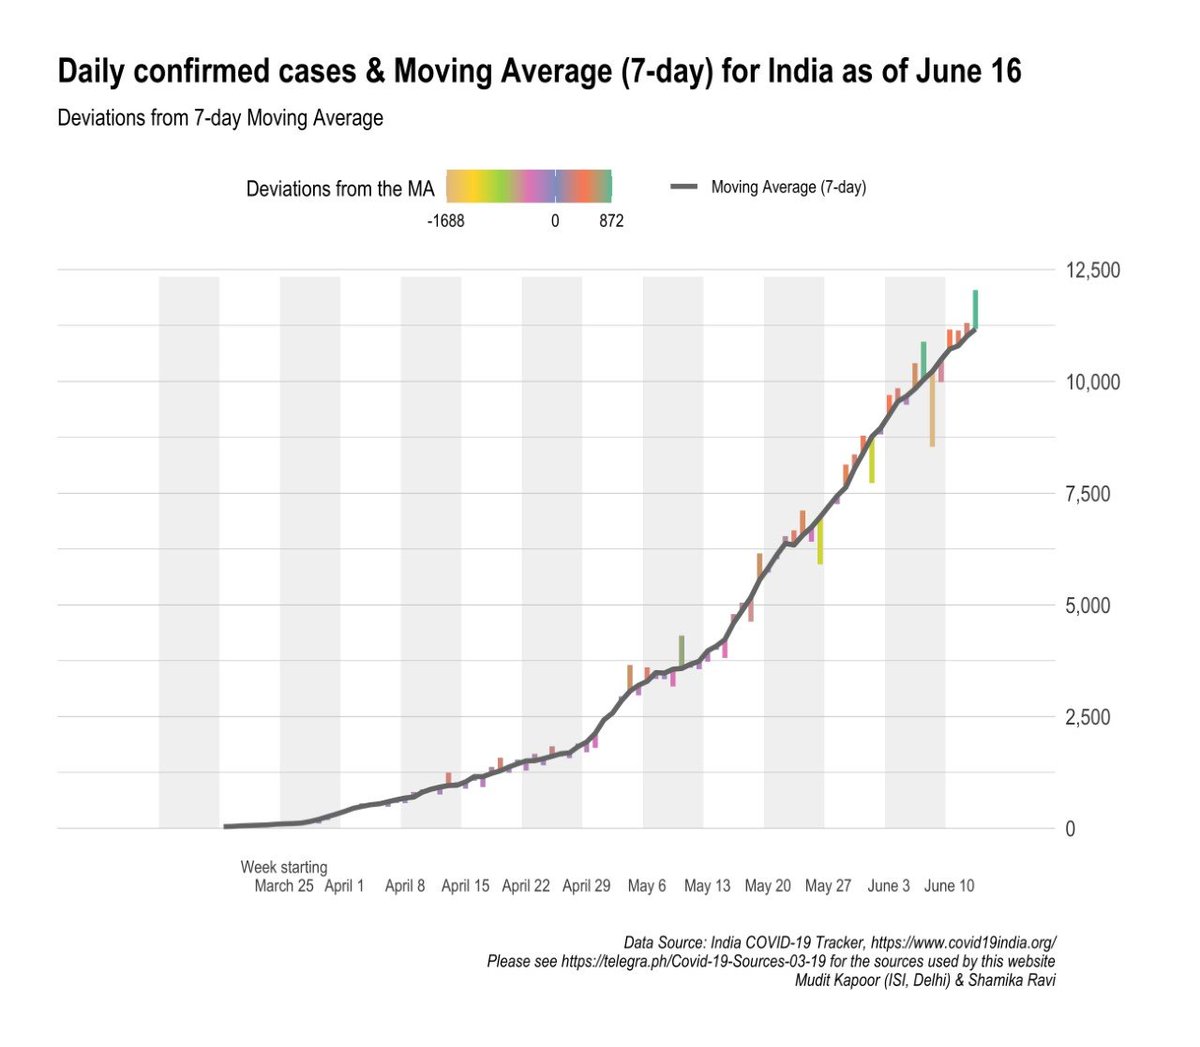 7 Day Moving Averages - and deviations:1) Daily cases2) Daily active cases3) Daily recovered cases4) Daily deaths